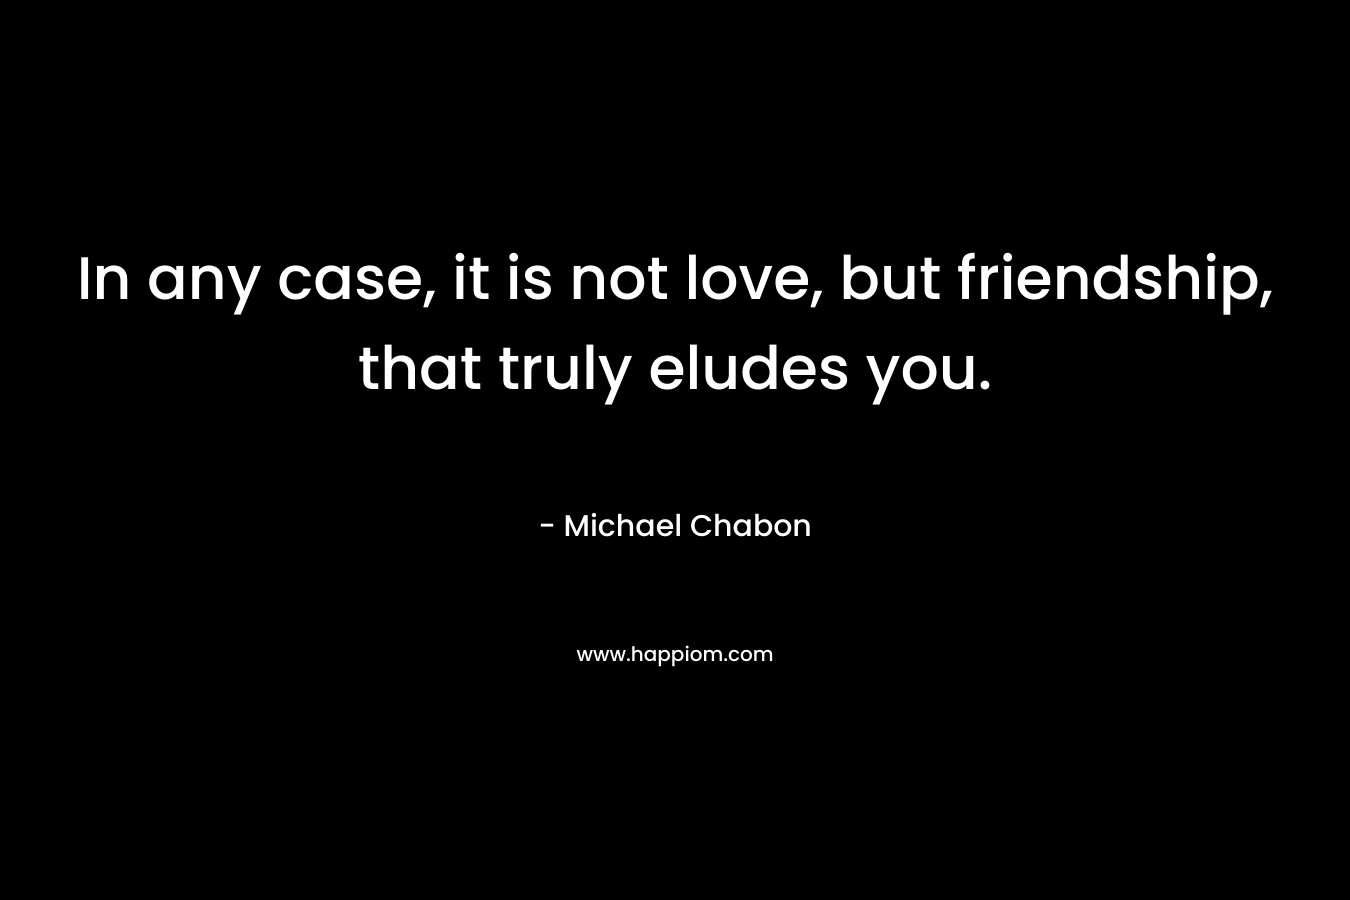 In any case, it is not love, but friendship, that truly eludes you. – Michael Chabon